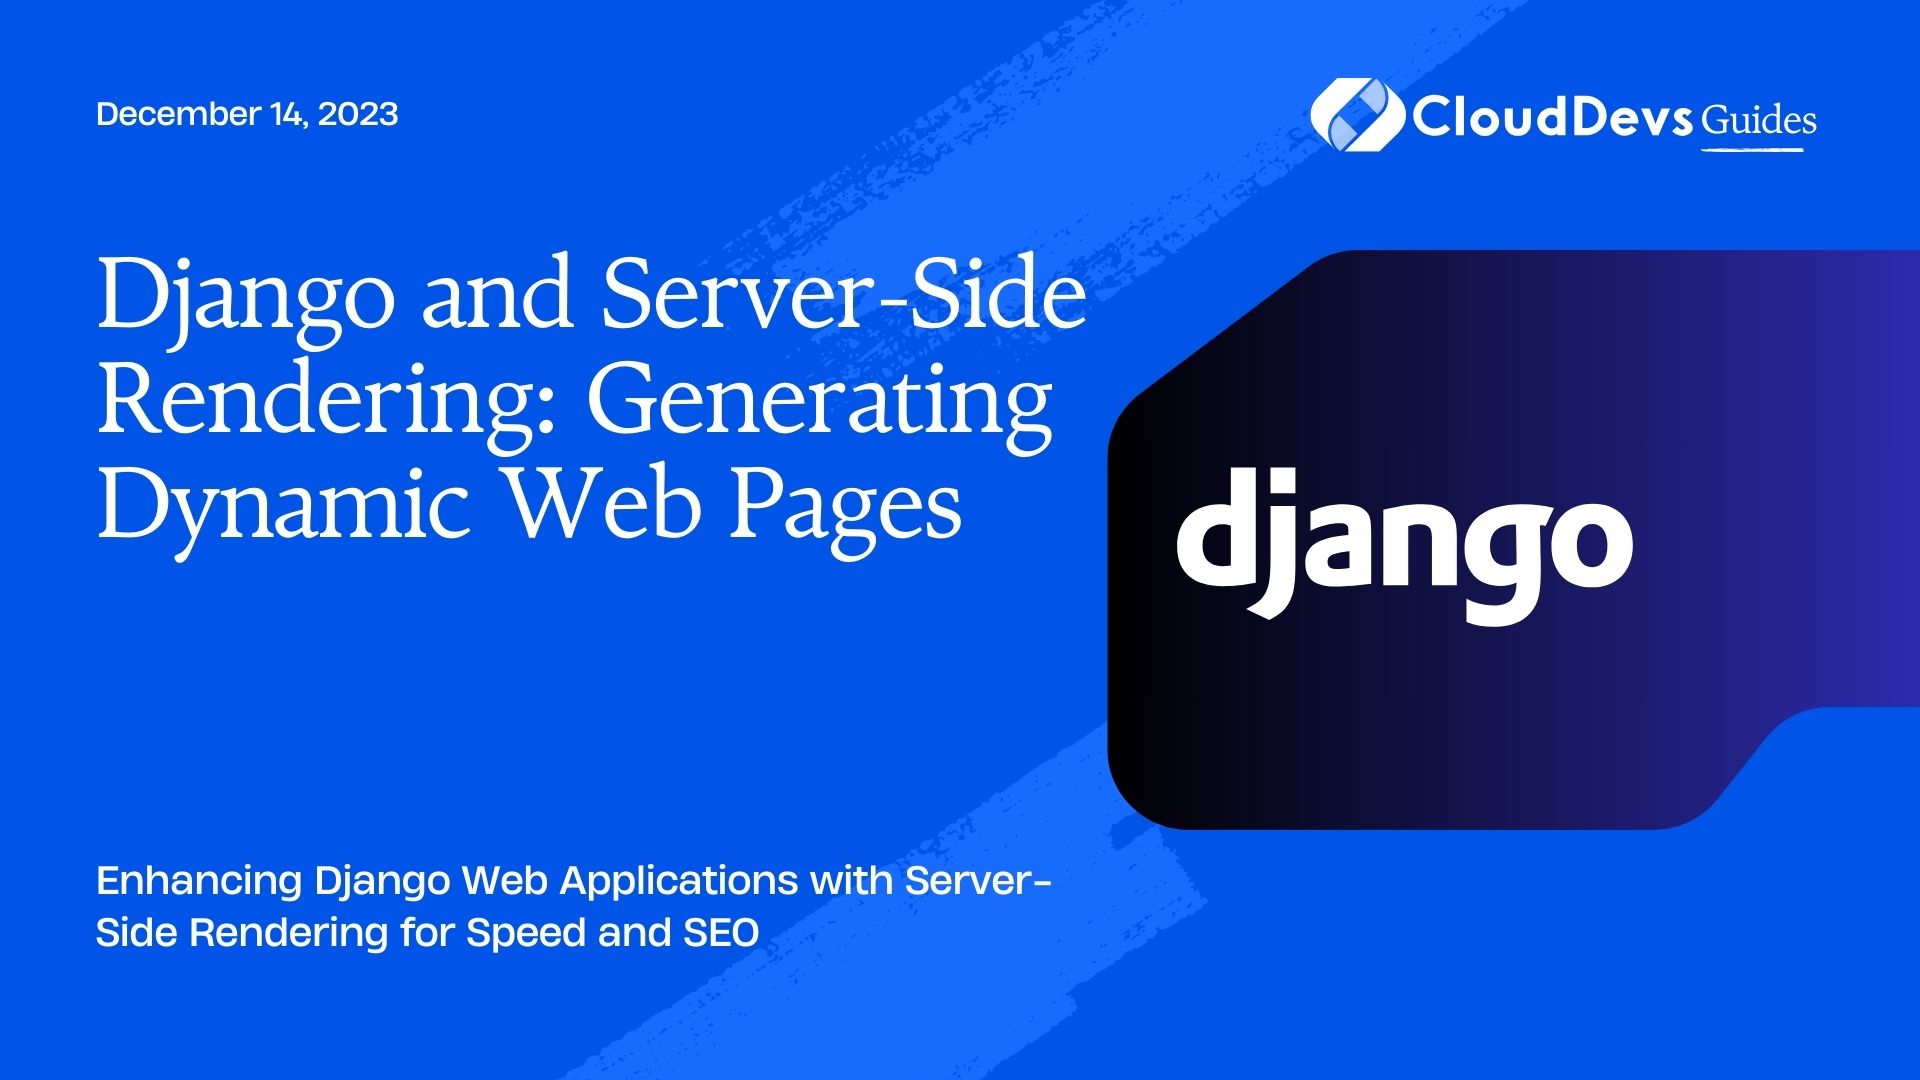 Django and Server-Side Rendering: Generating Dynamic Web Pages